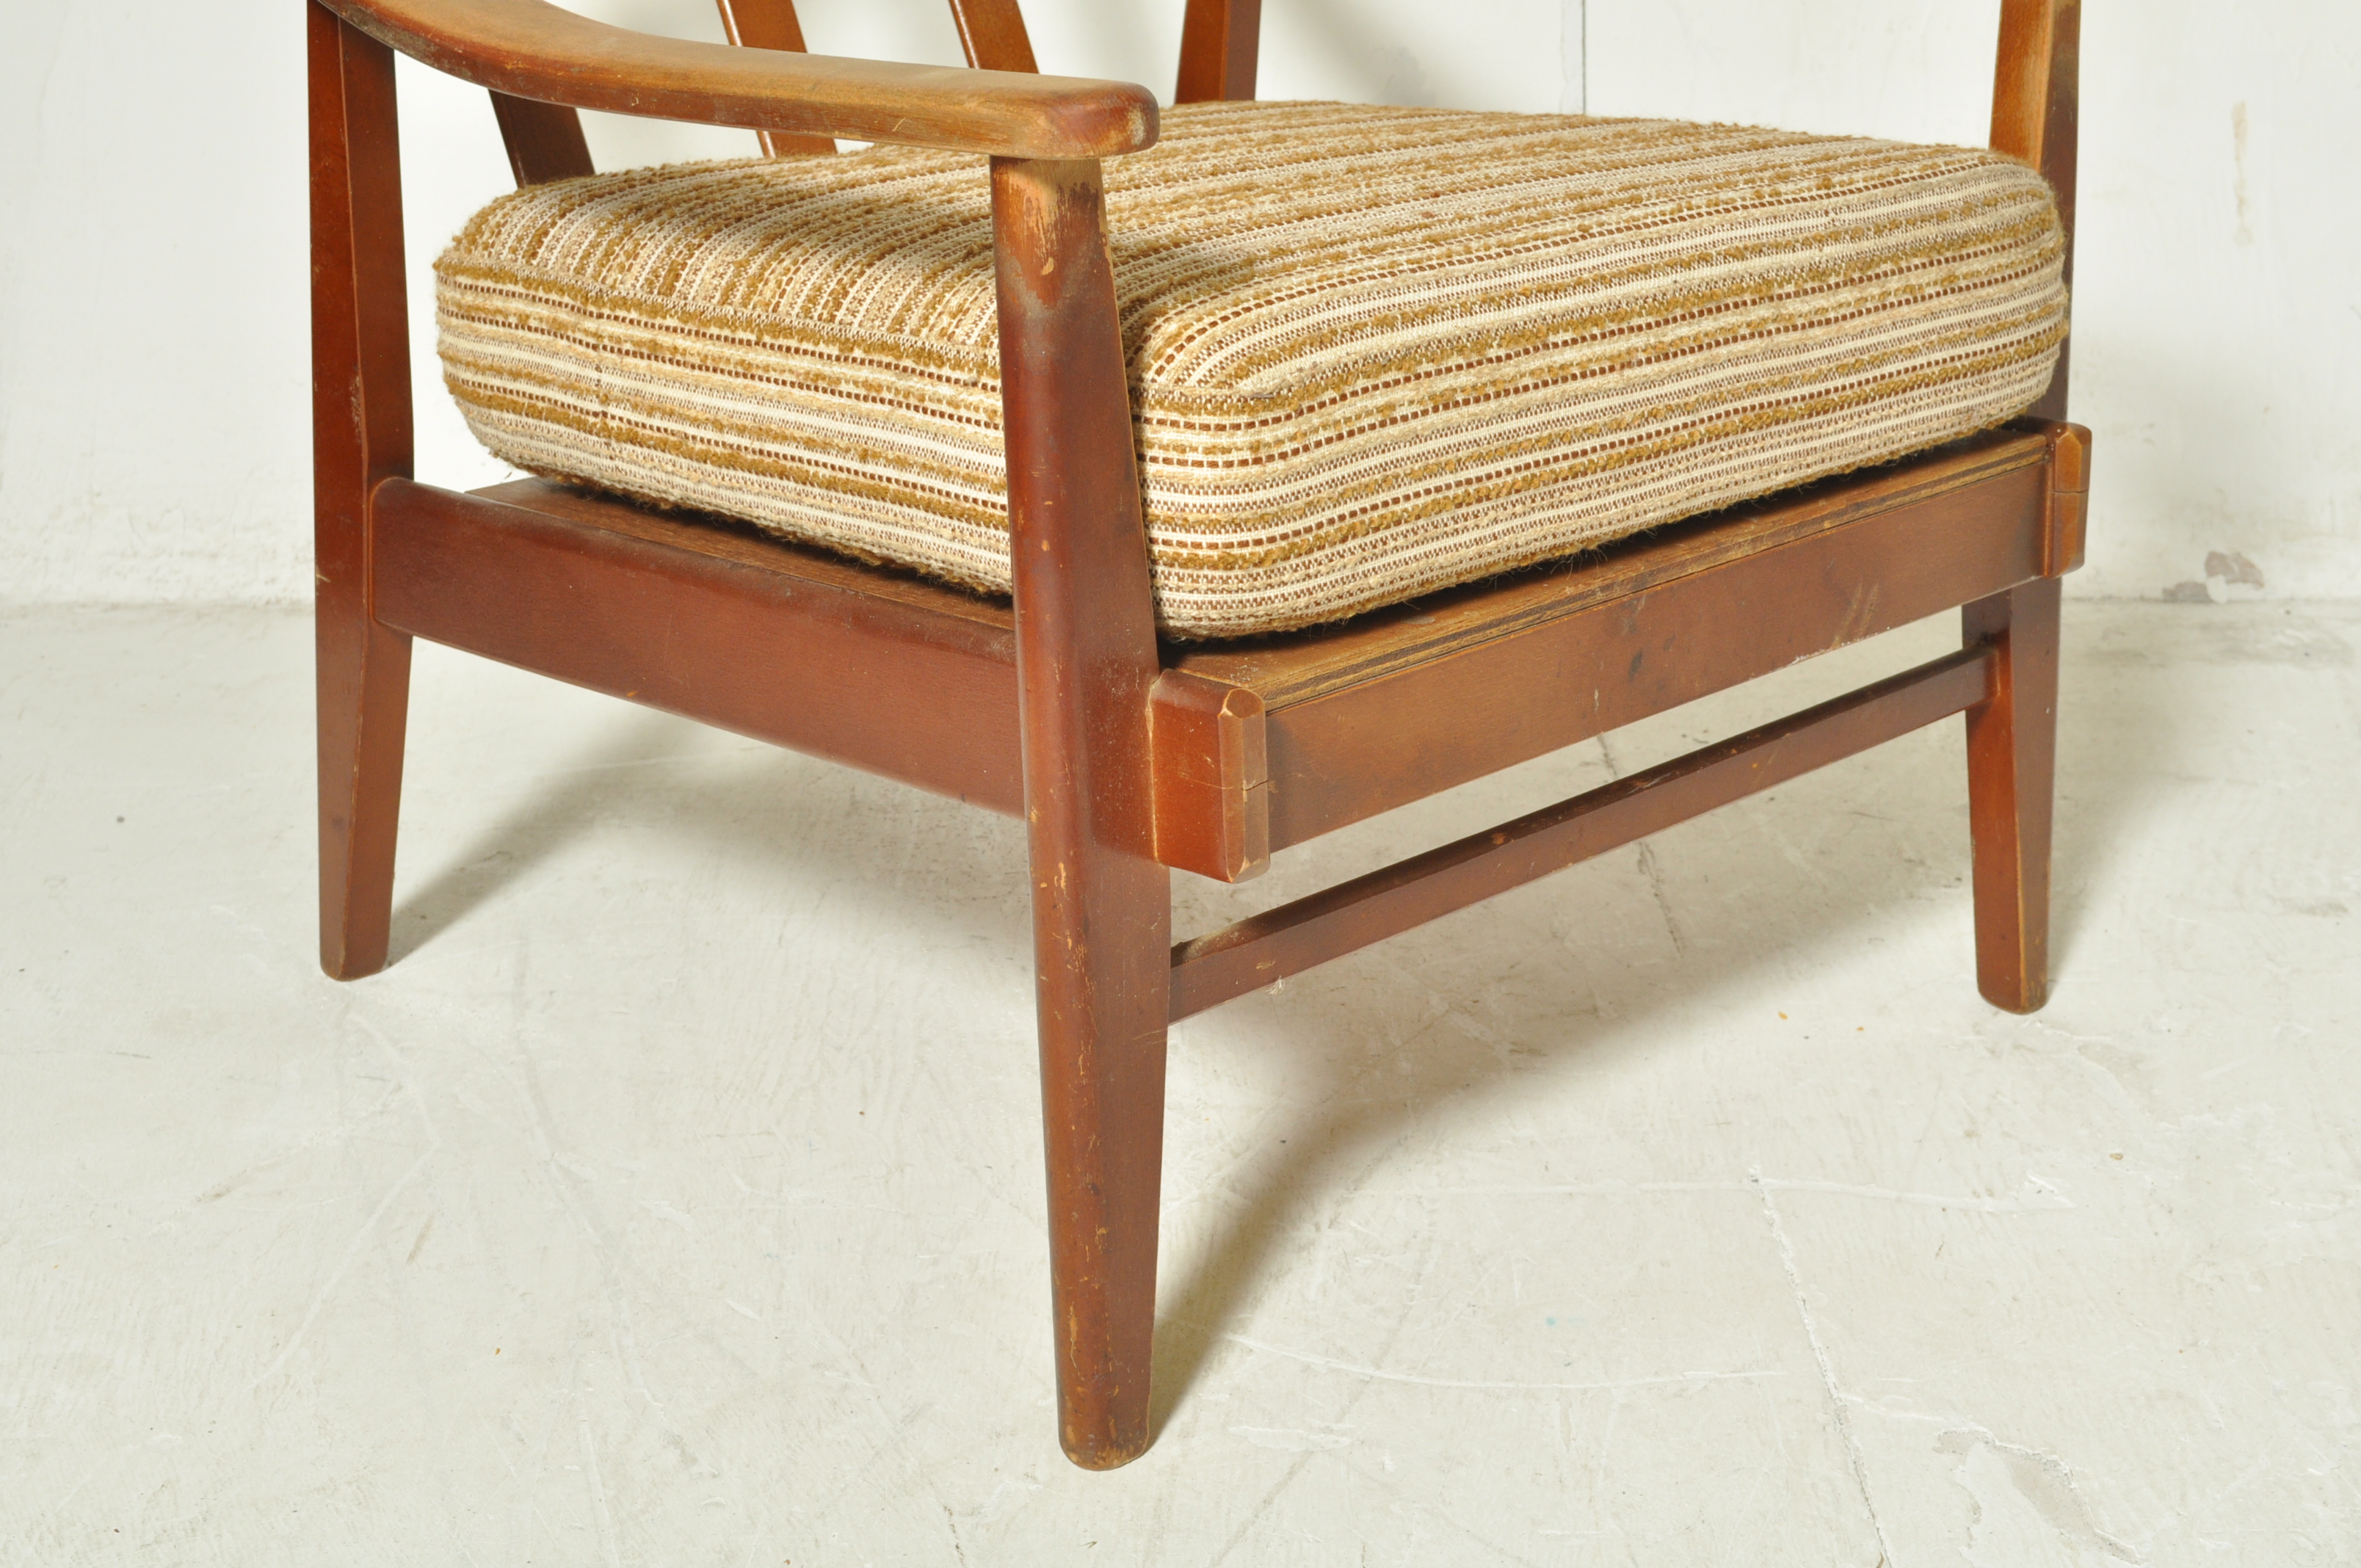 MID 20TH CENTURY DANISH INSPIRED SHOW WOOD EASY CHAIR - Image 2 of 5